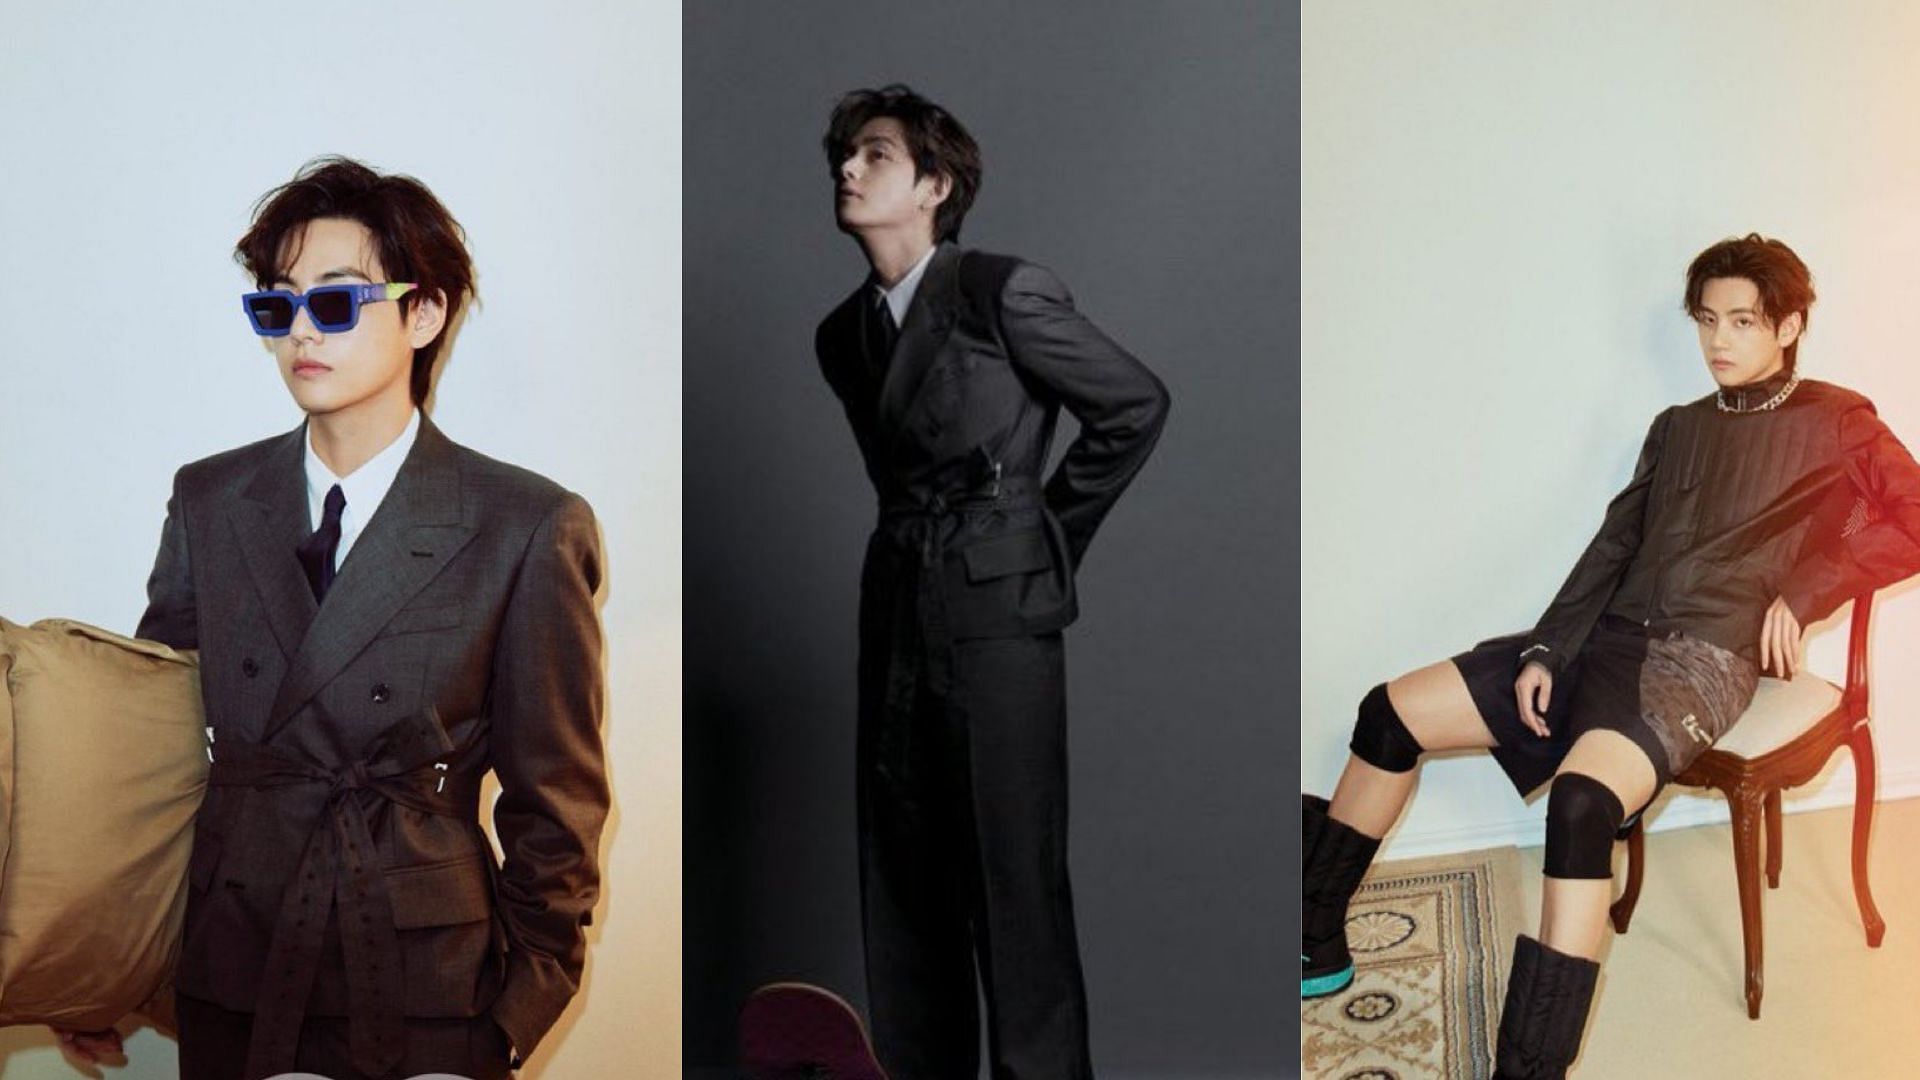 Tae-hyung looking chic for the Vogue x GQ collaboration photoshoot (Images via Vogue and GQ)